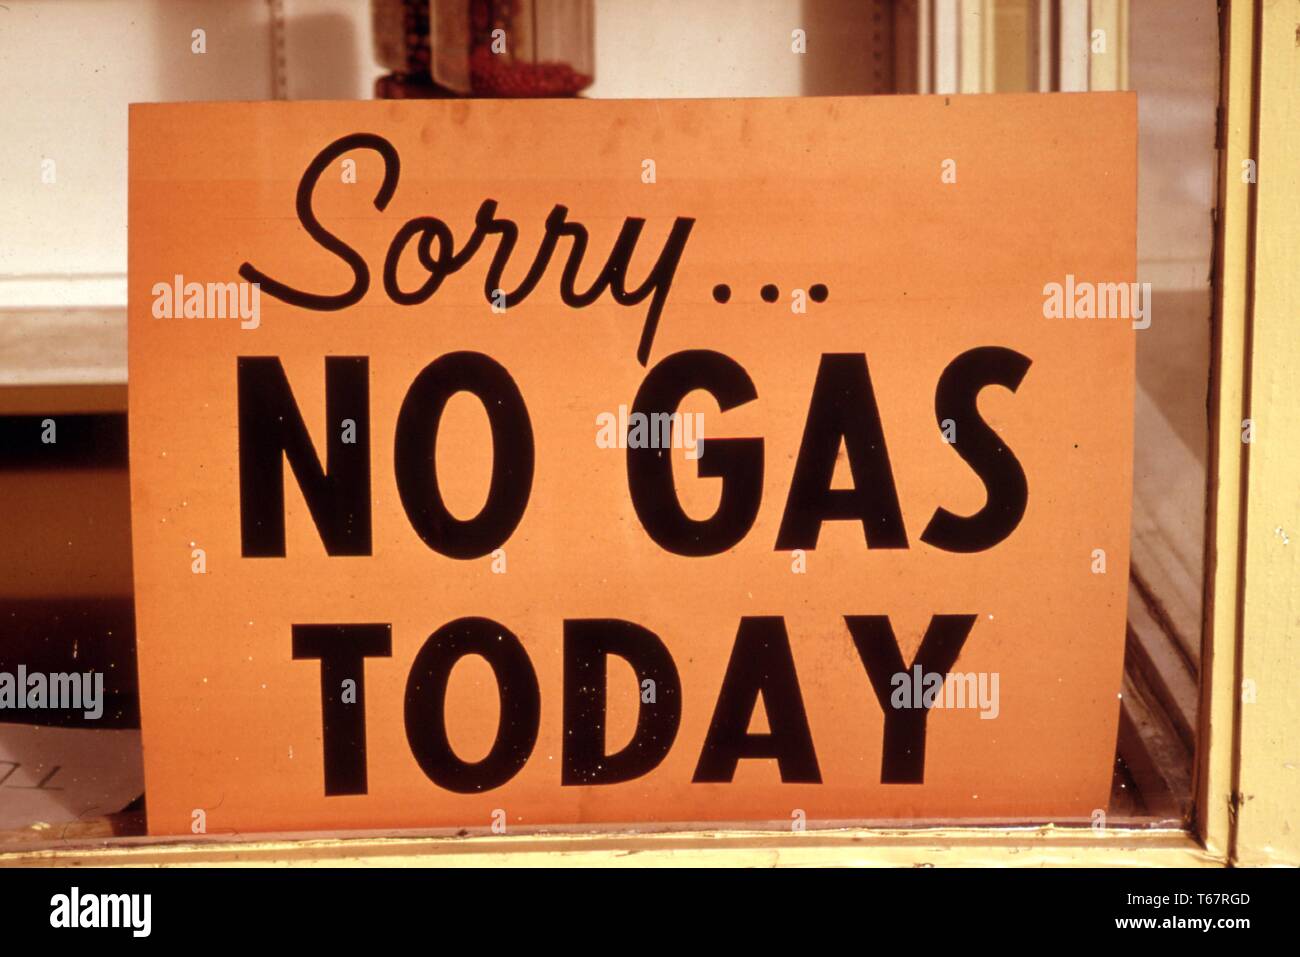 'No gas' signs were a common sight in Oregon during the fall of 1973, such as at this station in Lincoln city along the coast. Many stations closed earlier, opened later and shut down on the weekends. Image courtesy National Archives, United States, 1973. Stock Photo